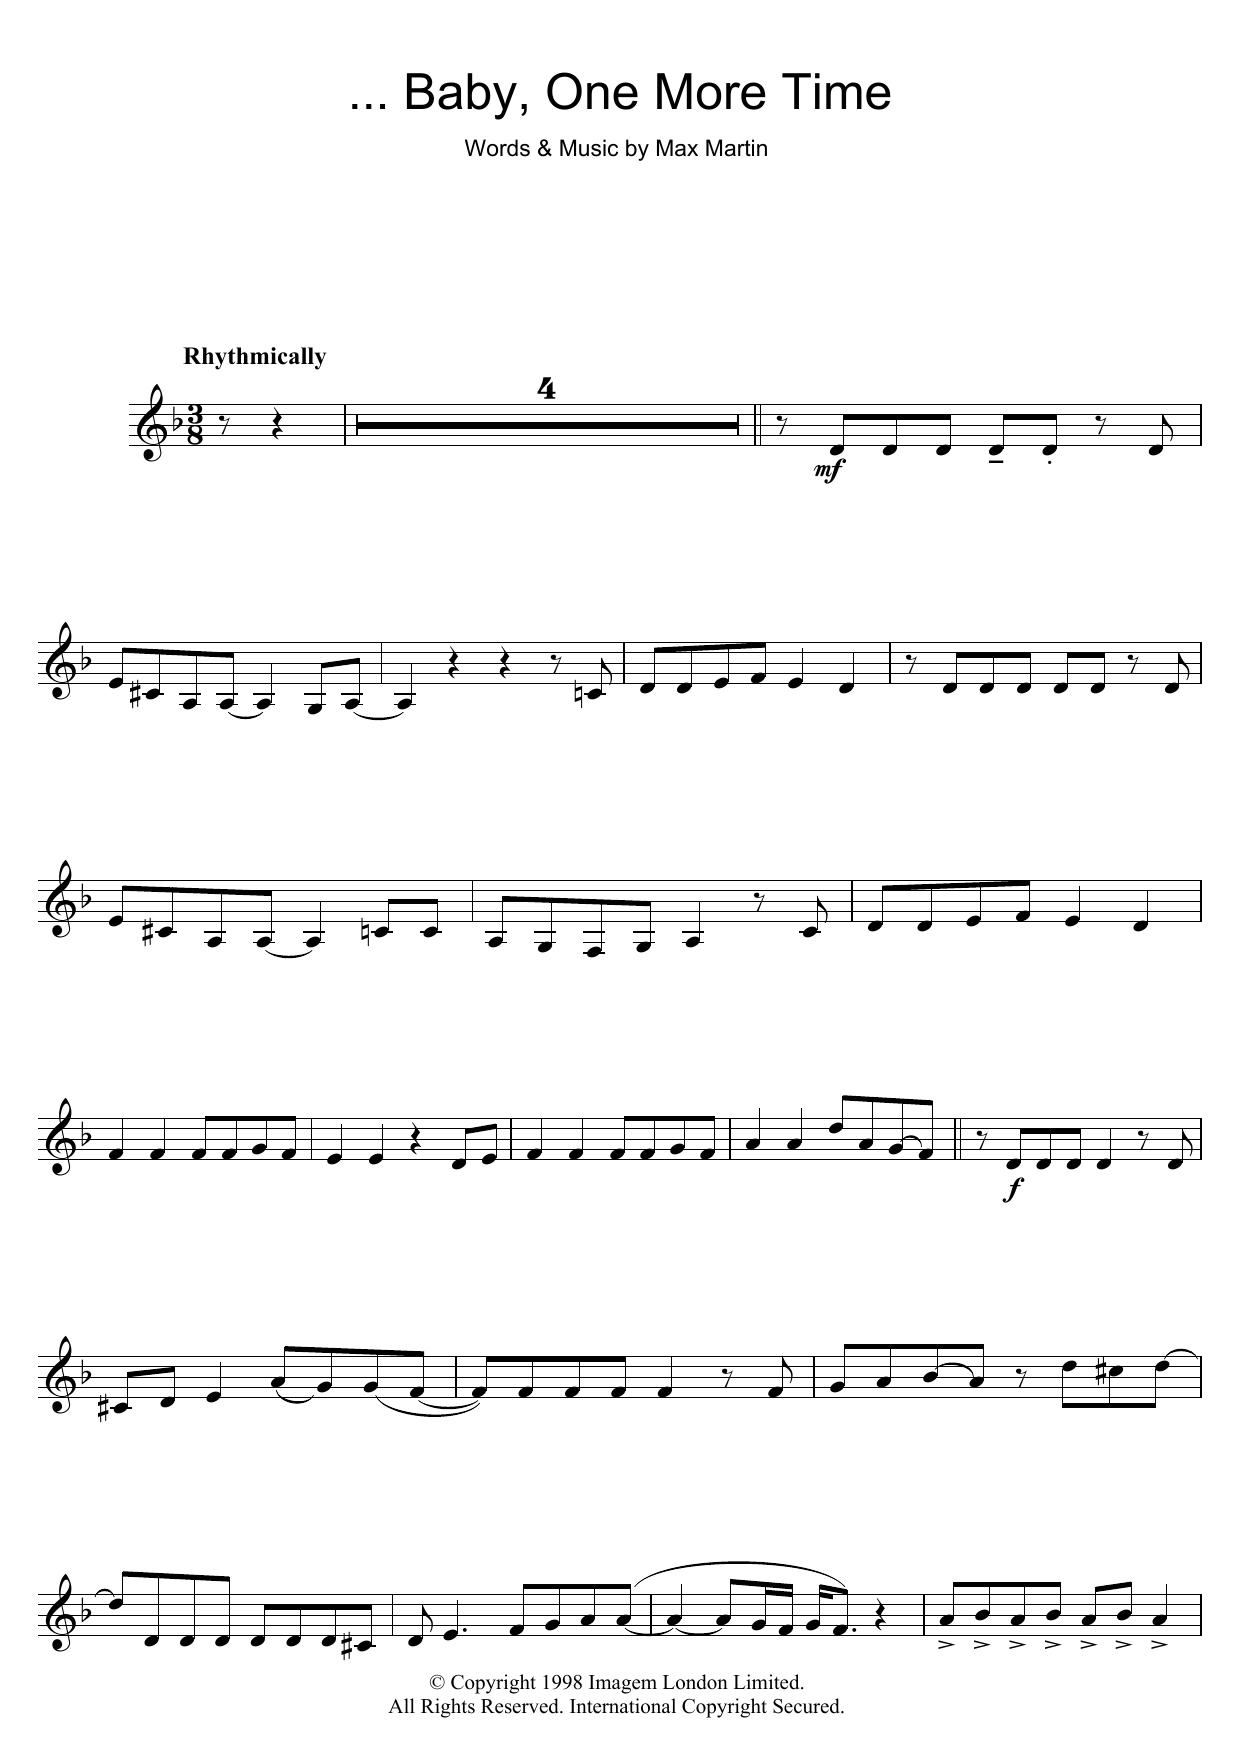 Download Britney Spears ...Baby One More Time Sheet Music